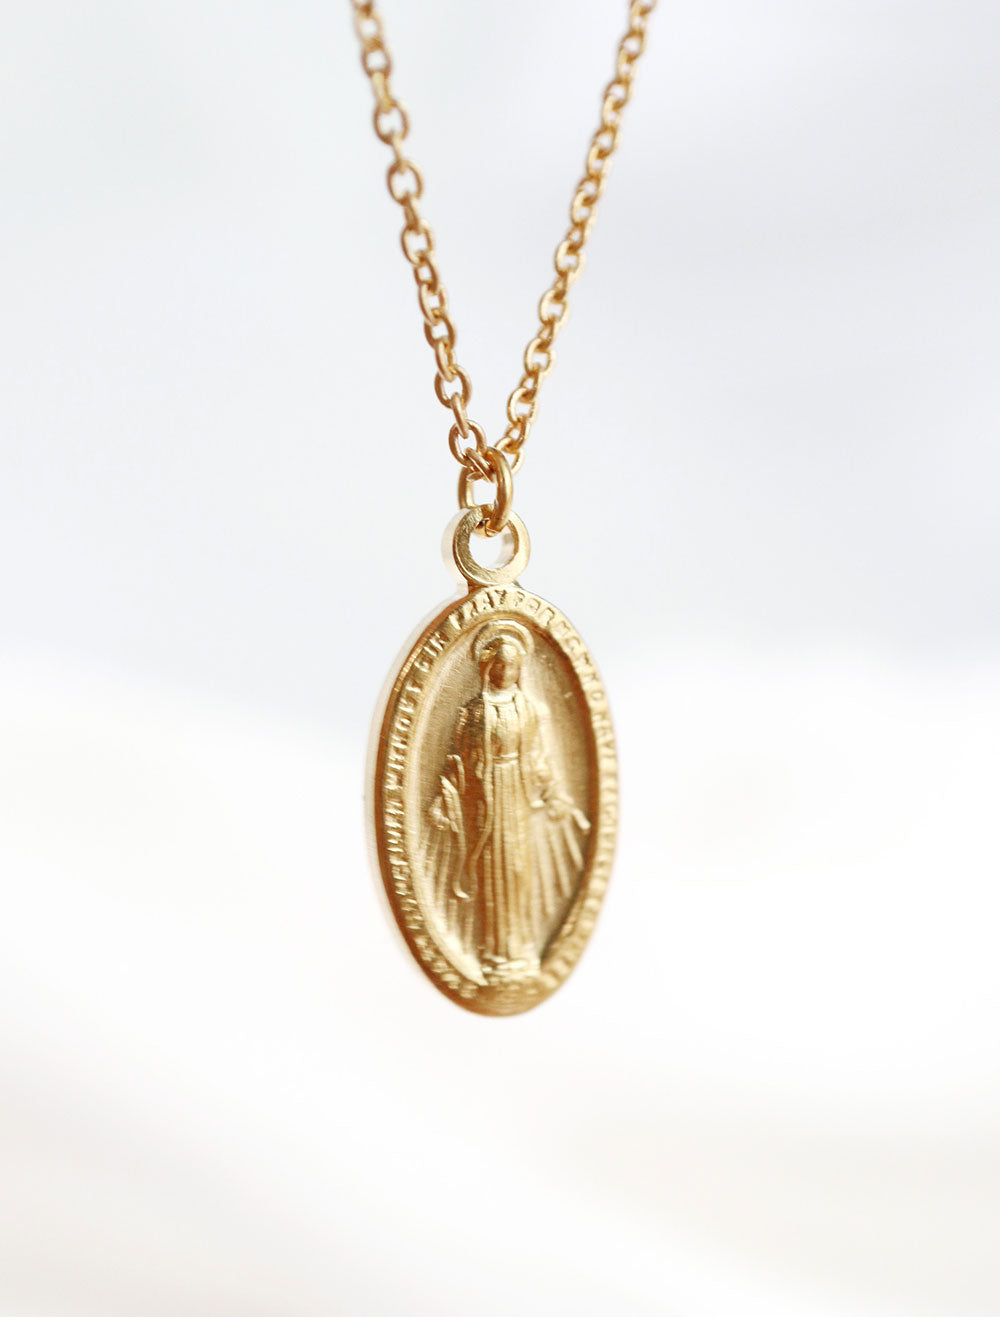 14k gold filled miraculous medal necklace